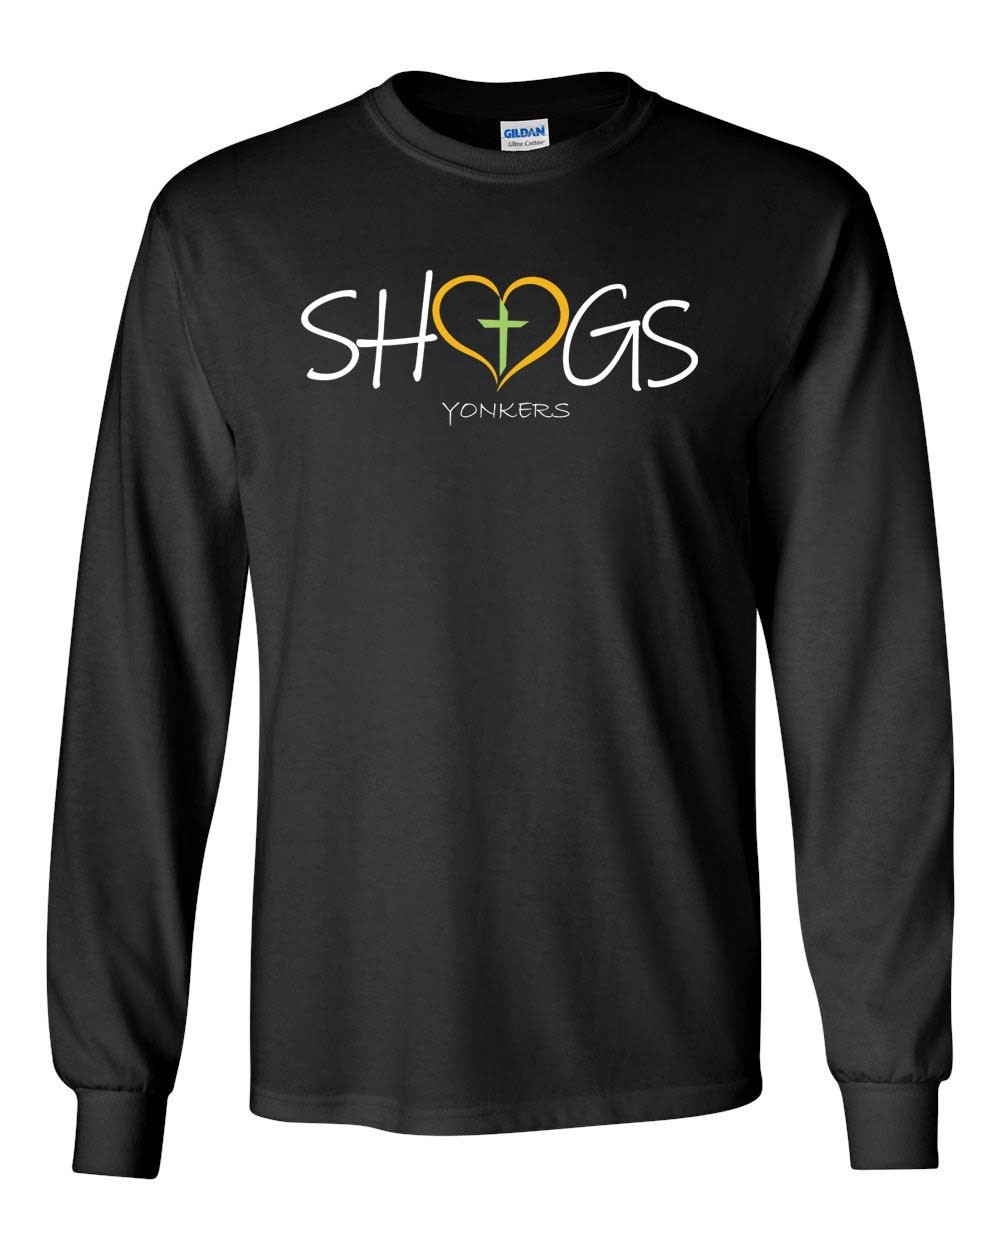 STAFF SHGS L/S T-Shirt w/ Heart Logo - Please Allow 2-3 Weeks for Delivery